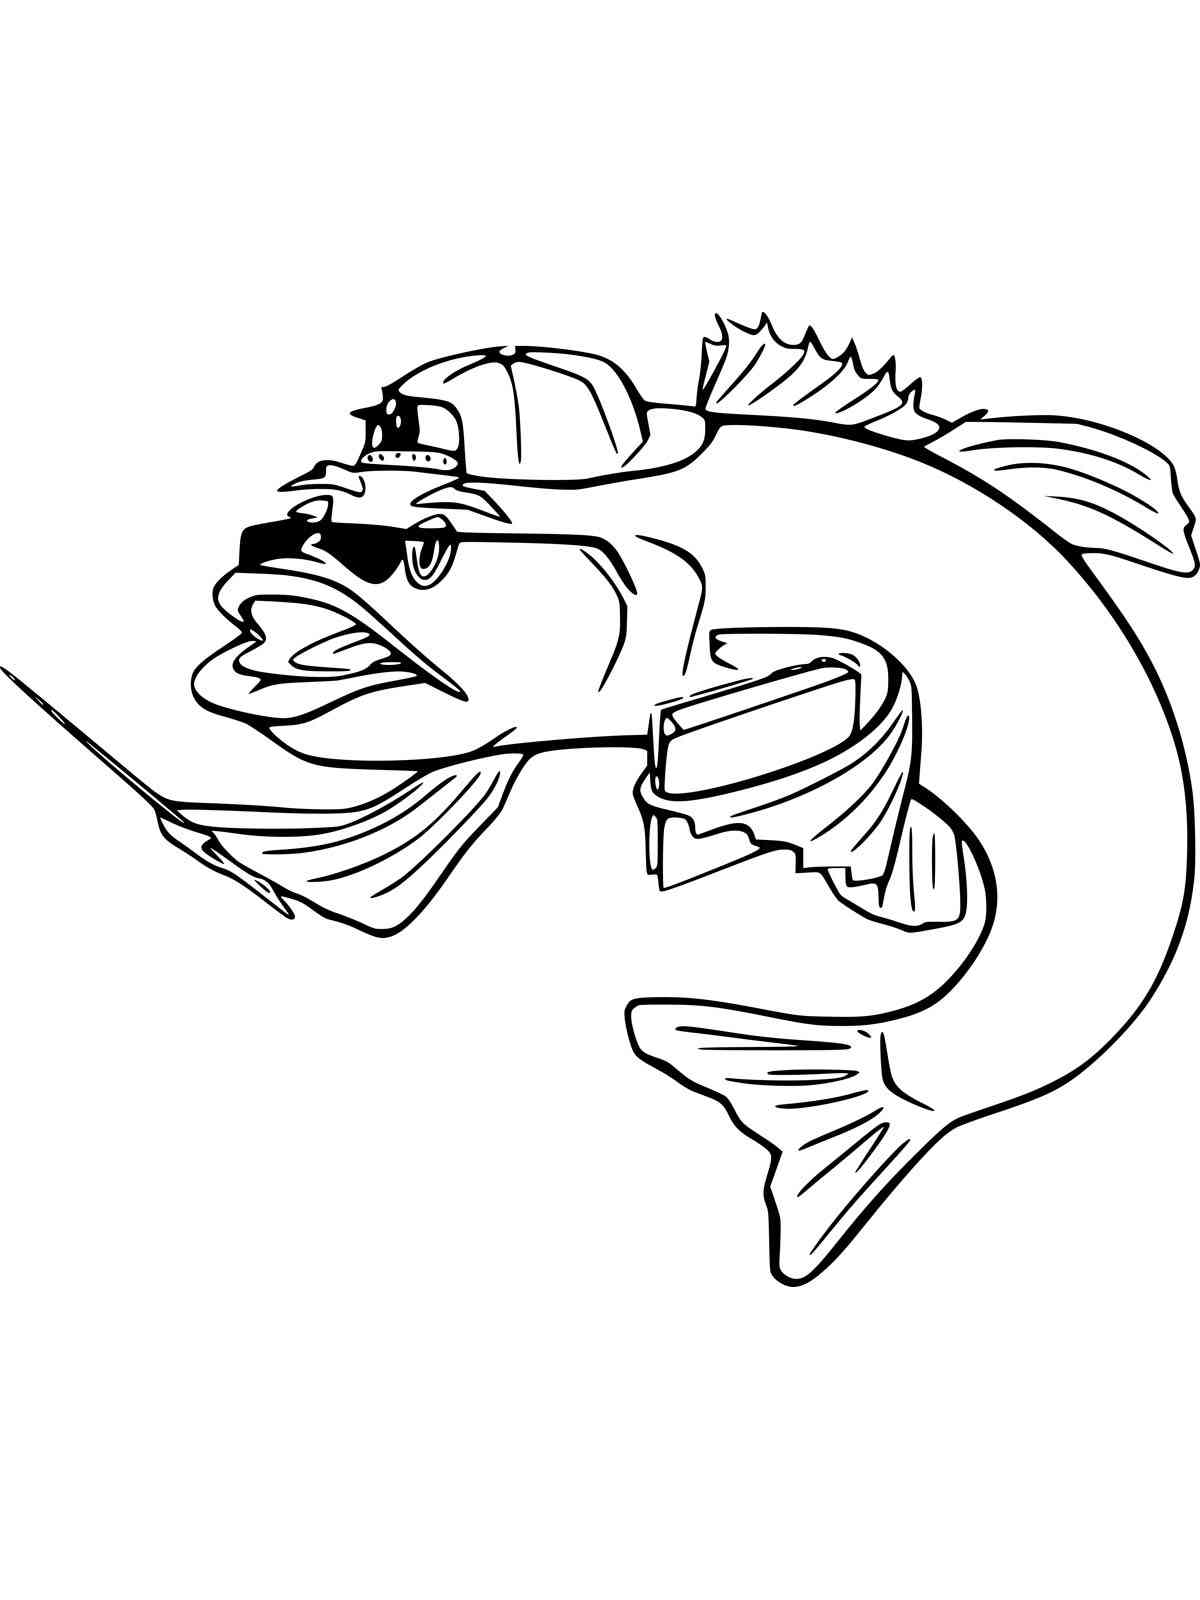 Cool Bass Fish coloring page